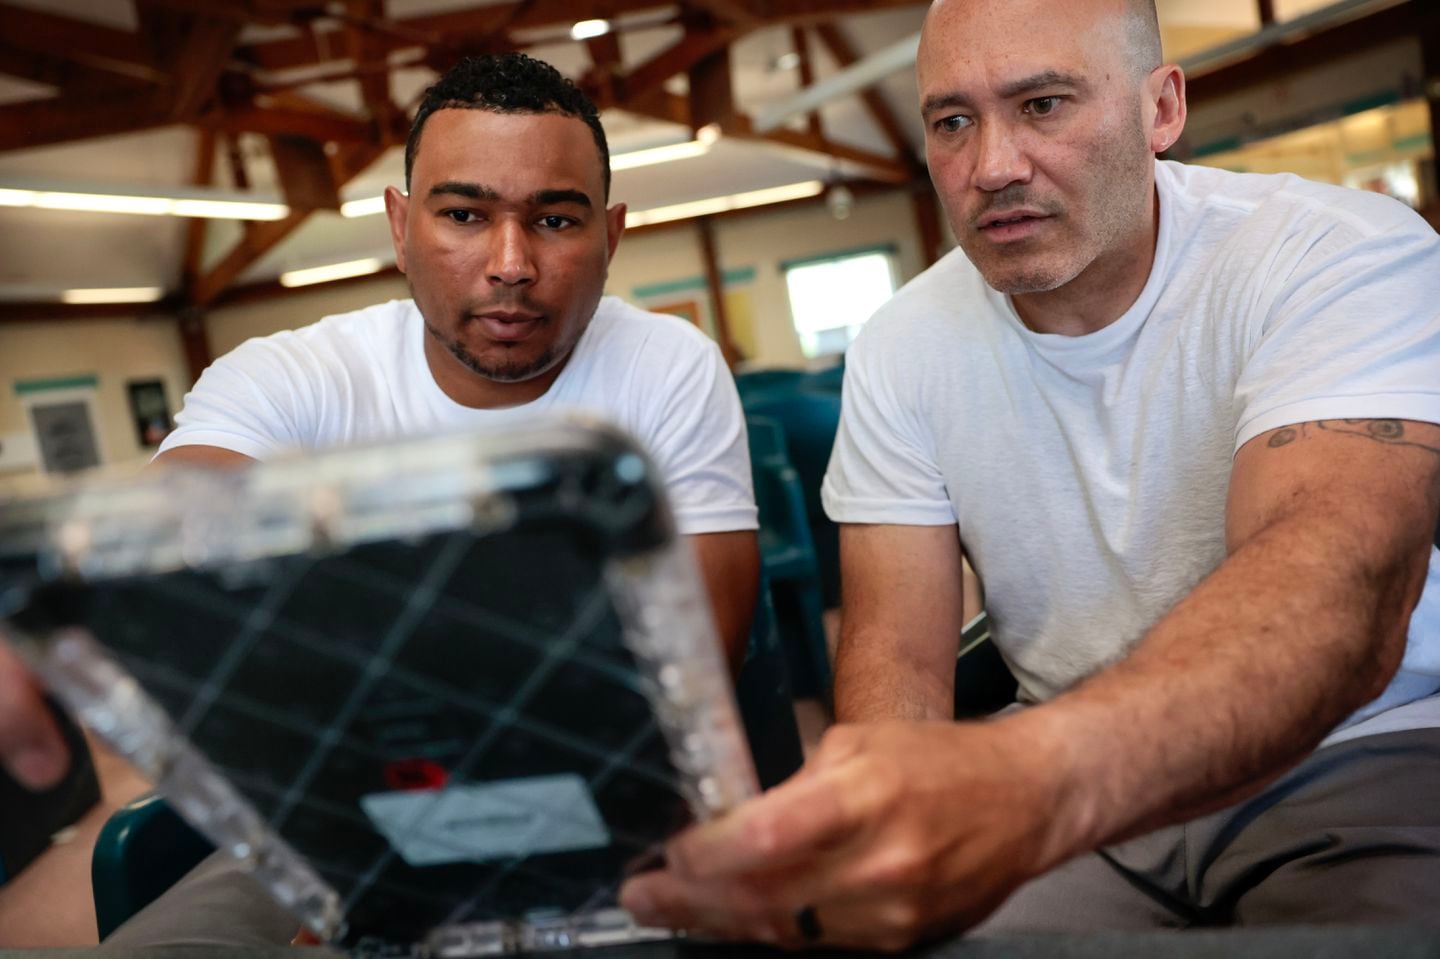 Inmates Christopher Merced (left) and David Class used an educational tablet supplied by the Massachusetts Department of Correction at the MCI-Norfolk prison.